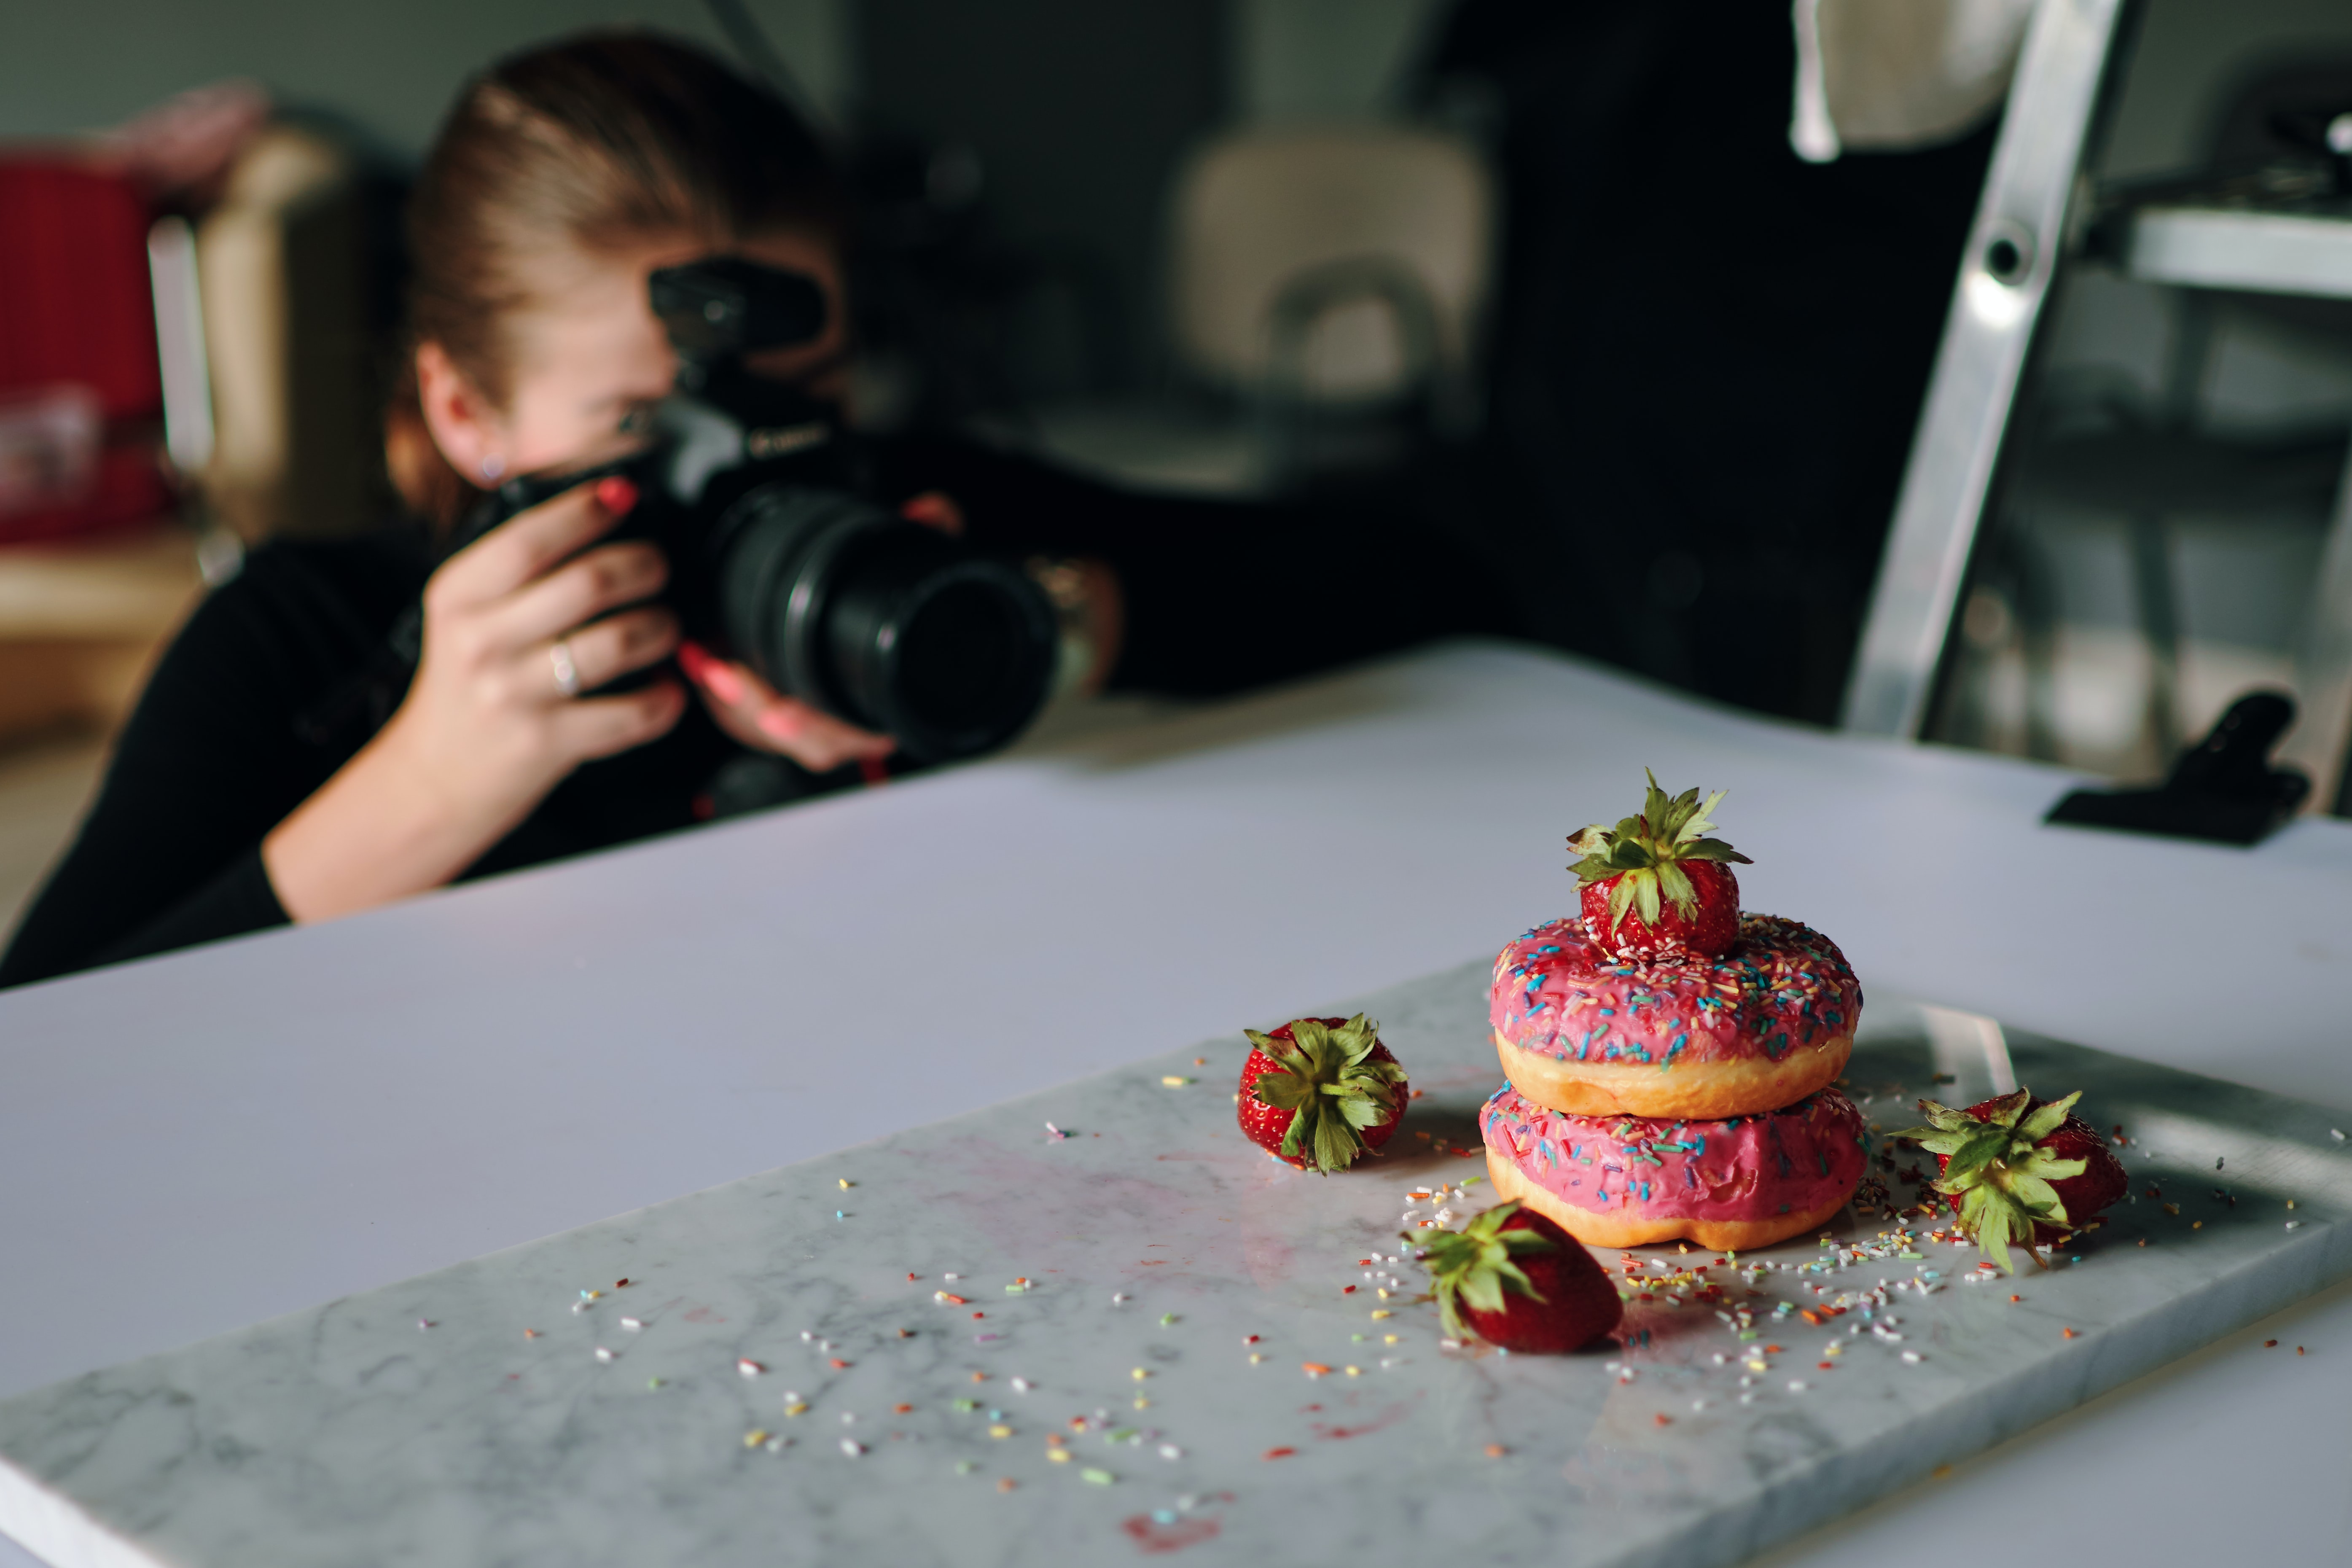 Image of a photo shoot to demonstrate that you can take your own photos when you need images for your email marketing campaigns